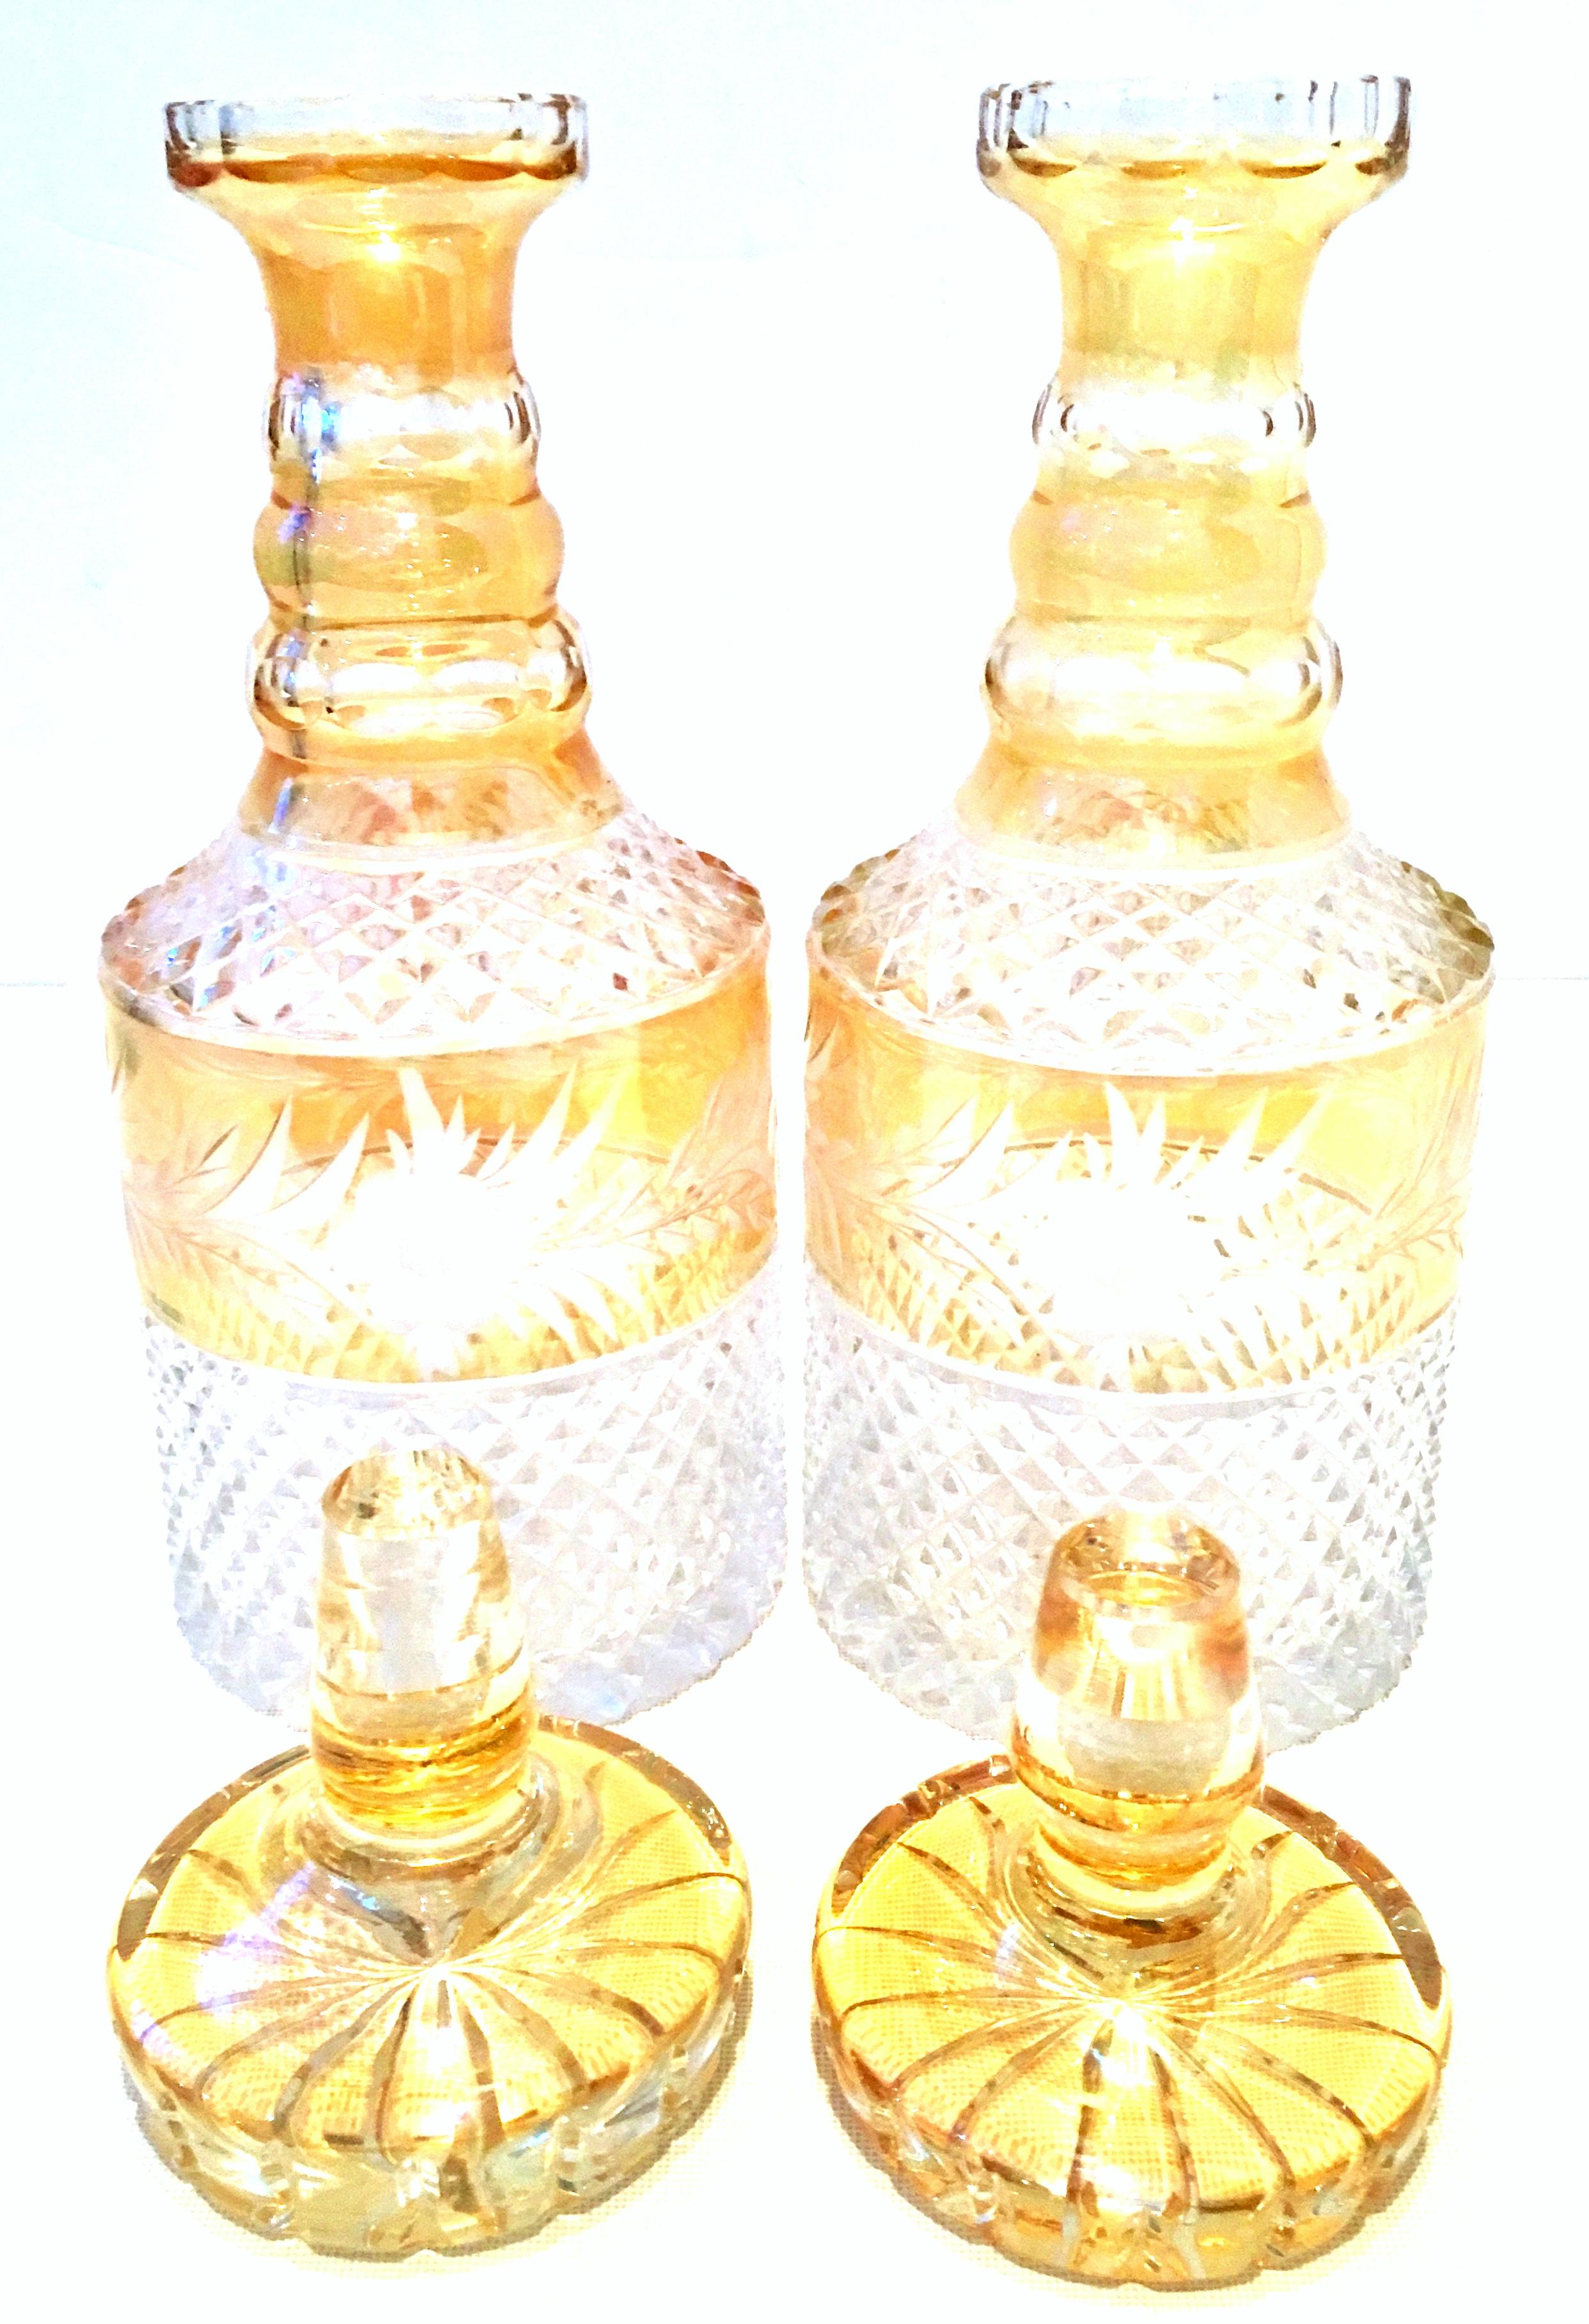 Mid-20th century pair of Bohemia cut crystal liquor decanter's. Features a diamond cut pattern with citrine color and etched floral pattern.